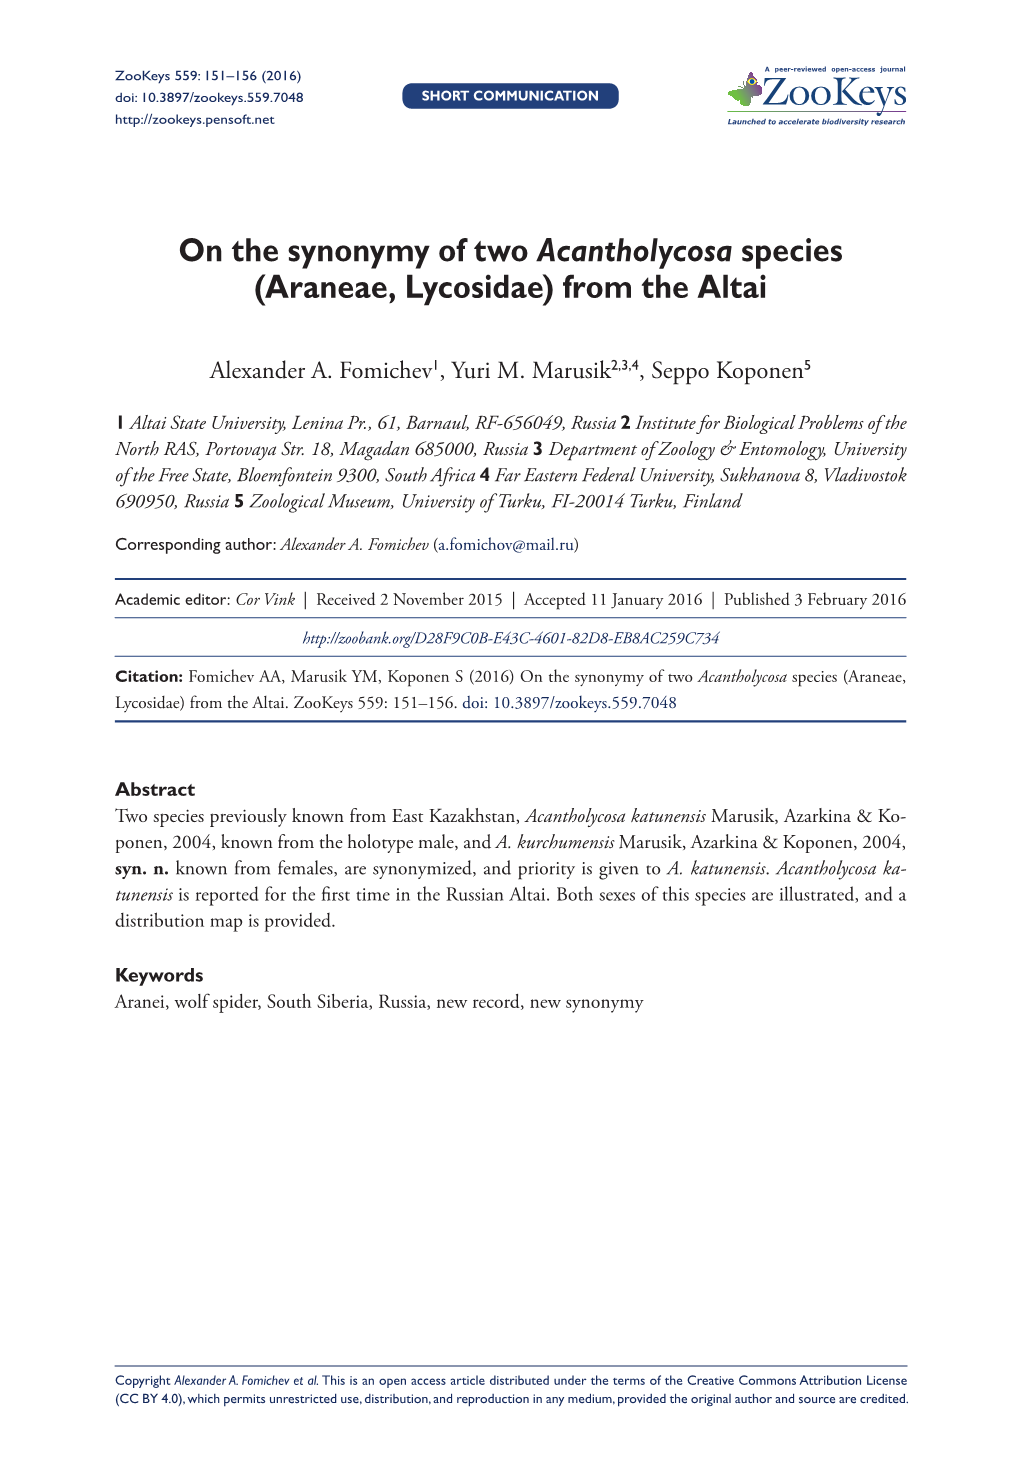 On the Synonymy of Two Acantholycosa Species (Araneae, Lycosidae) from the Altai